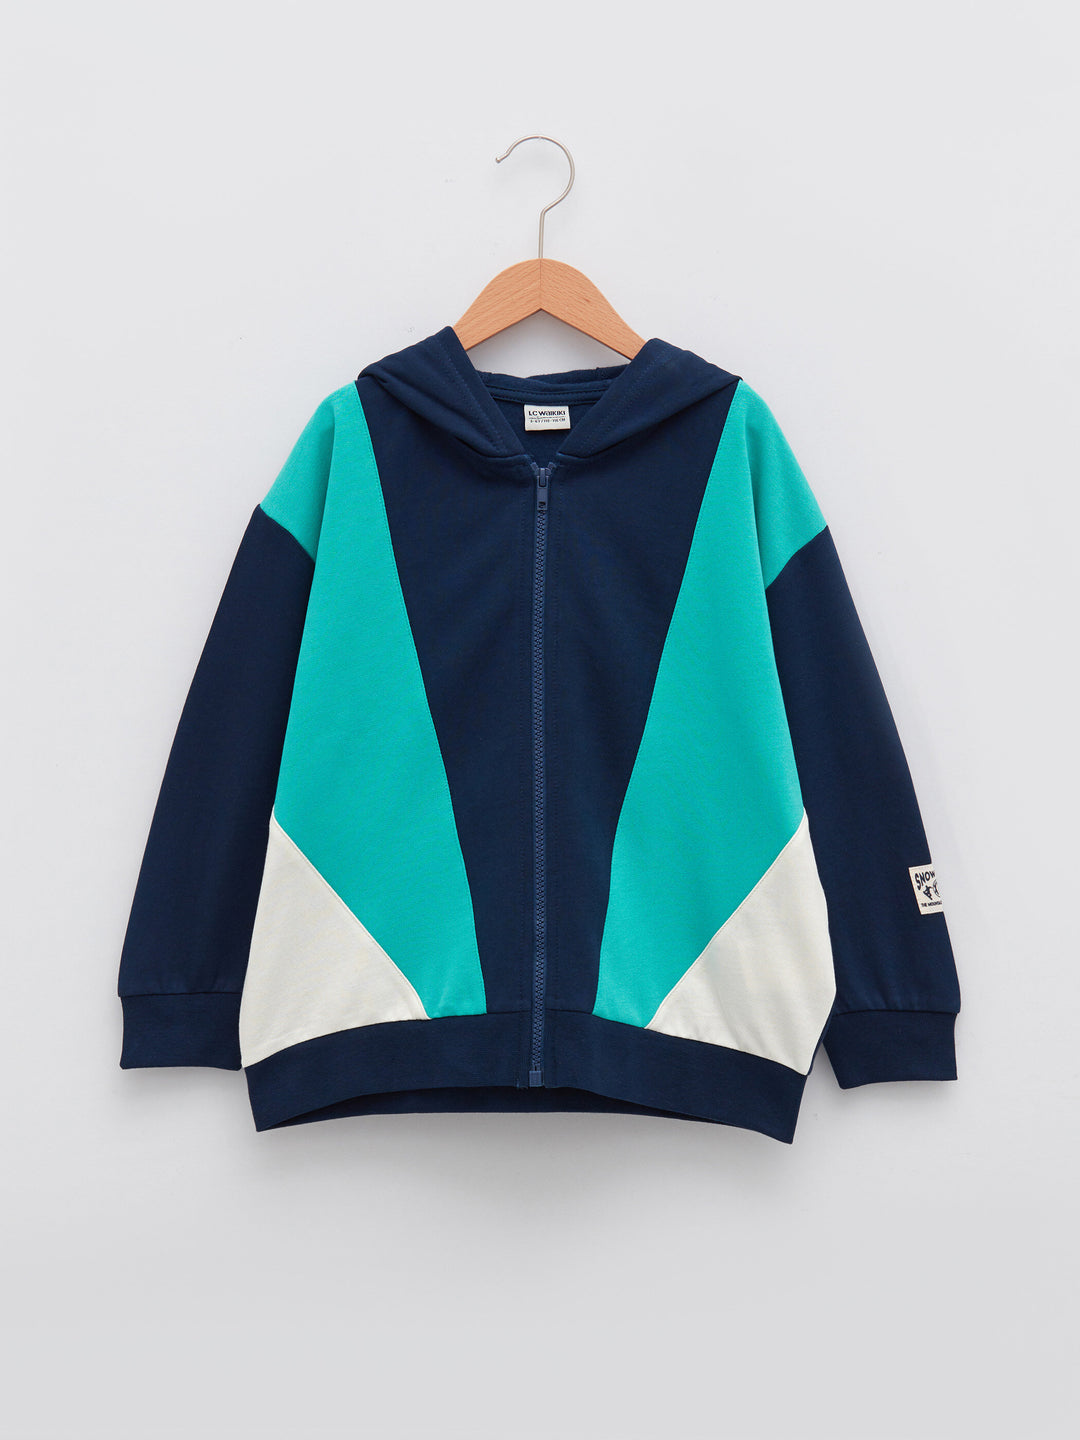 Navy Colored Cardigan For Kids Boys